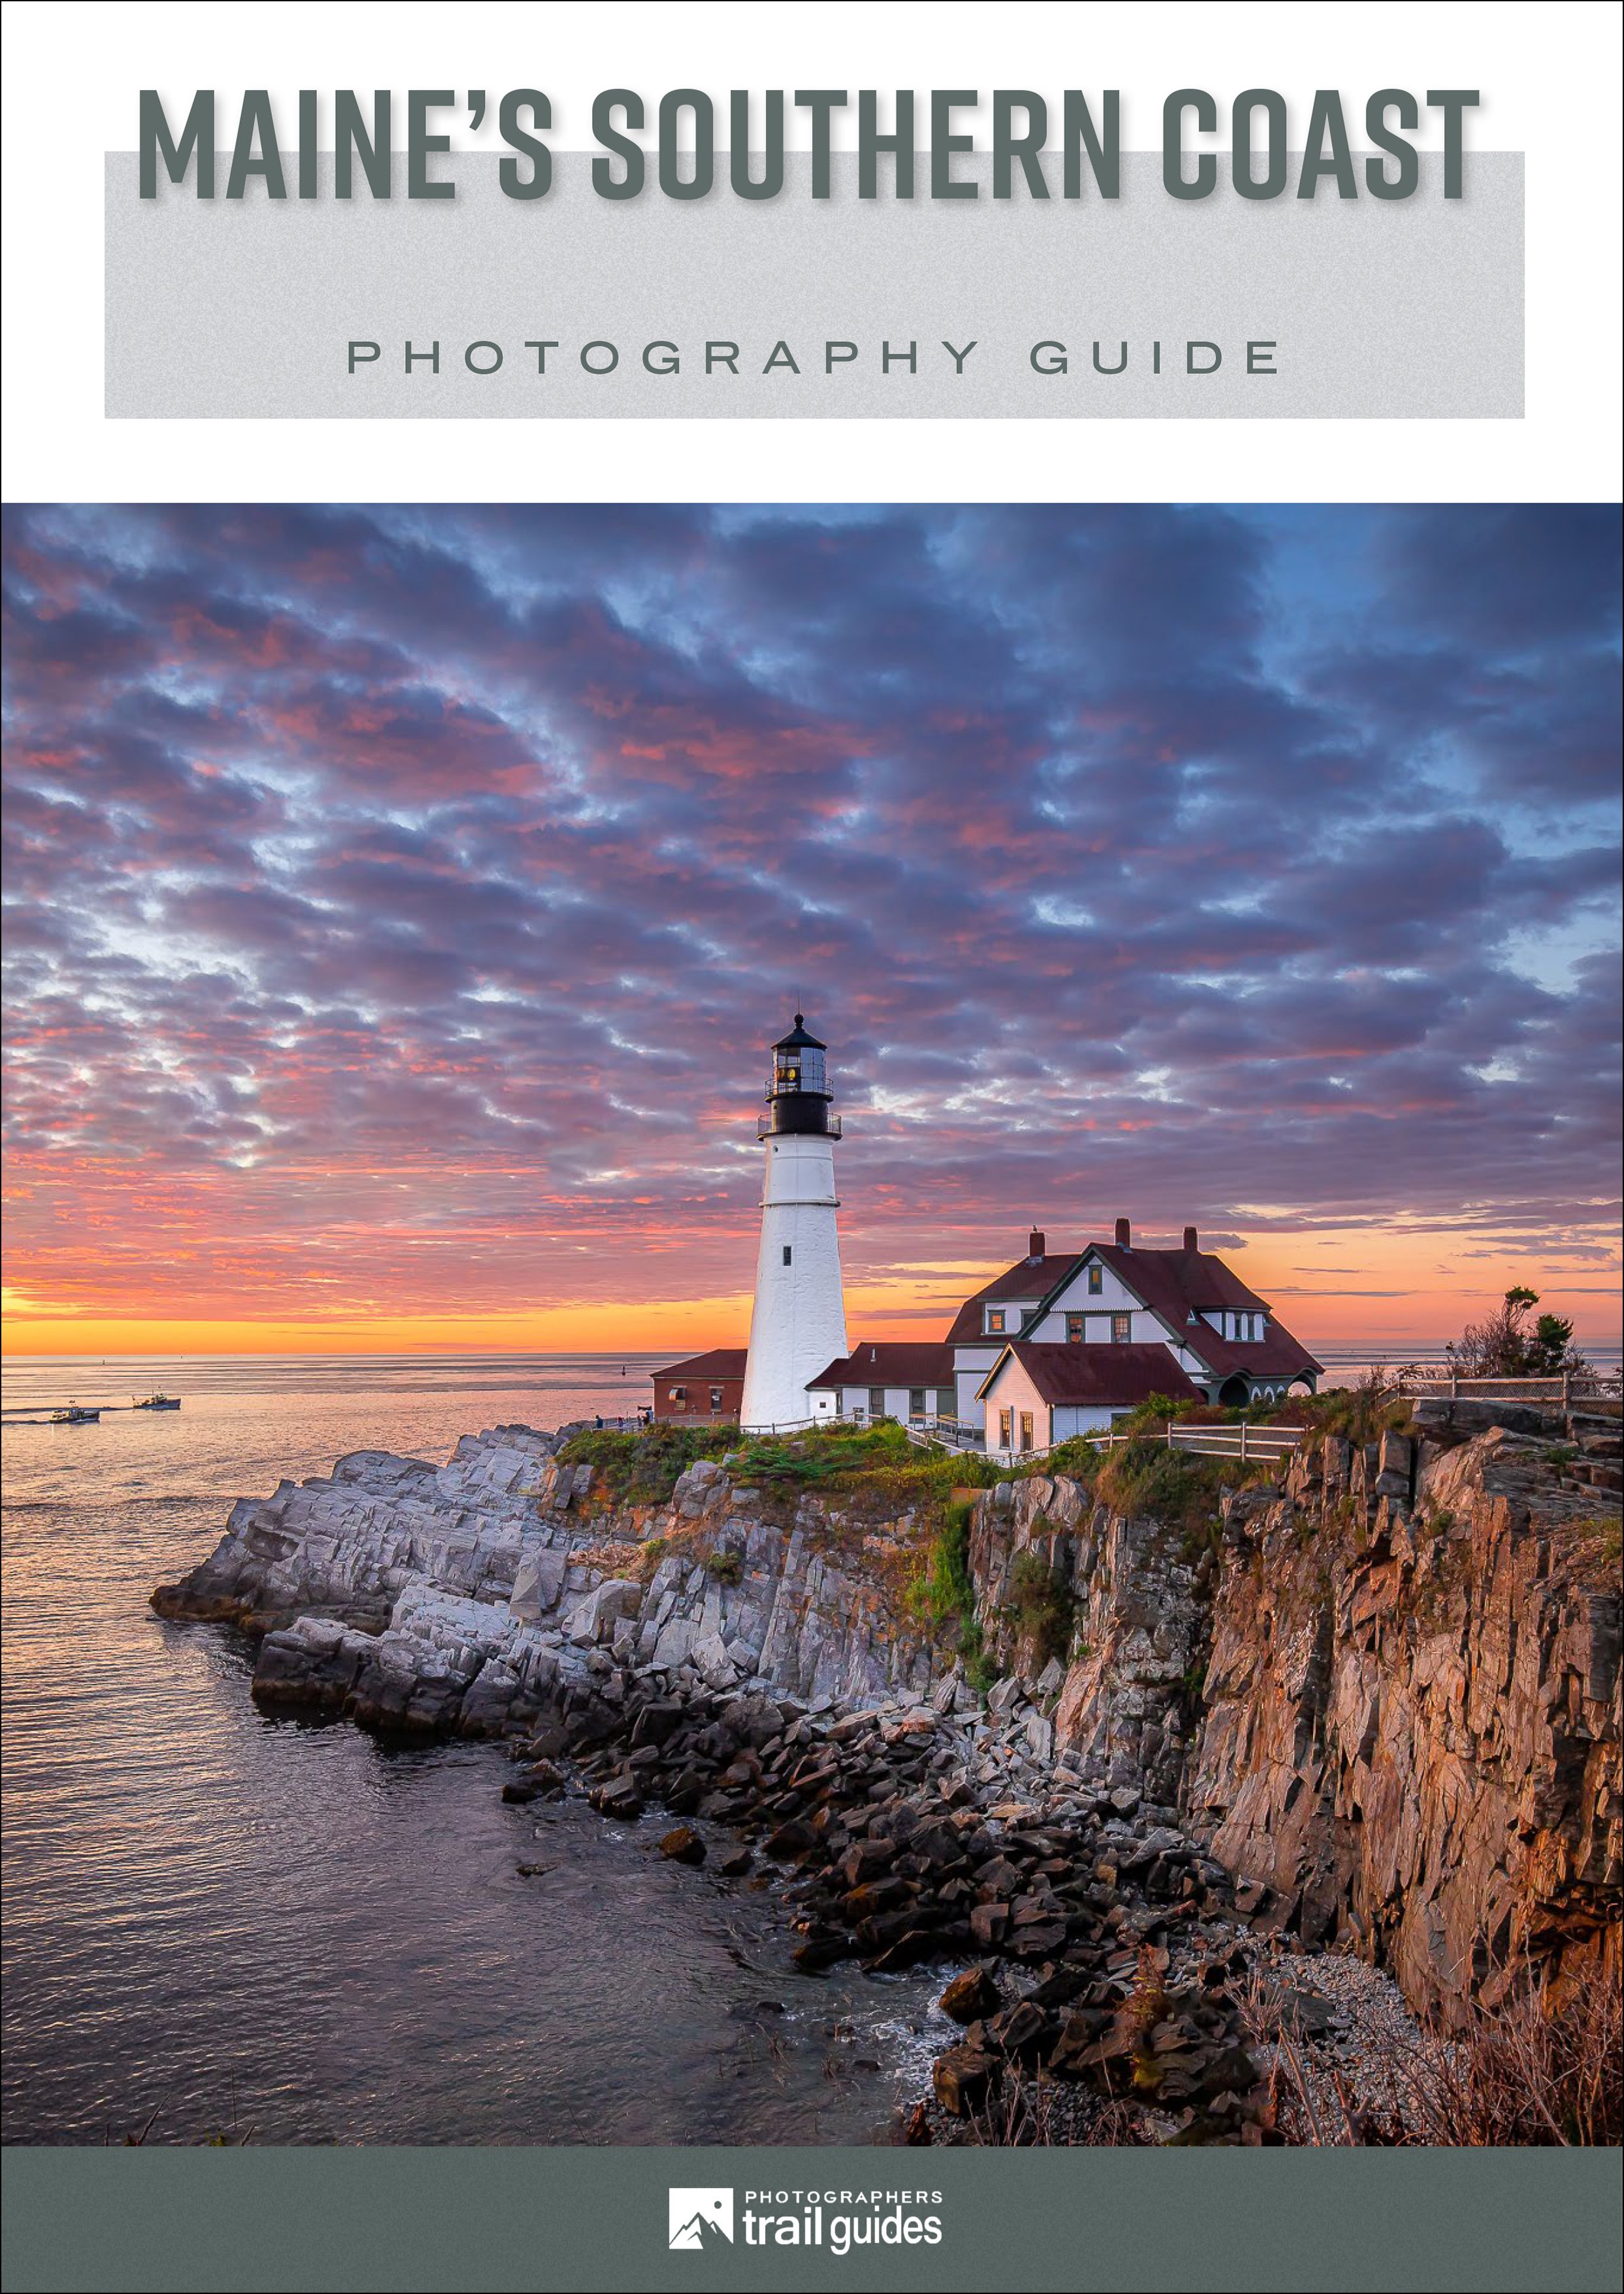 Guide Book Covers-Maine Southern Coast.jpg